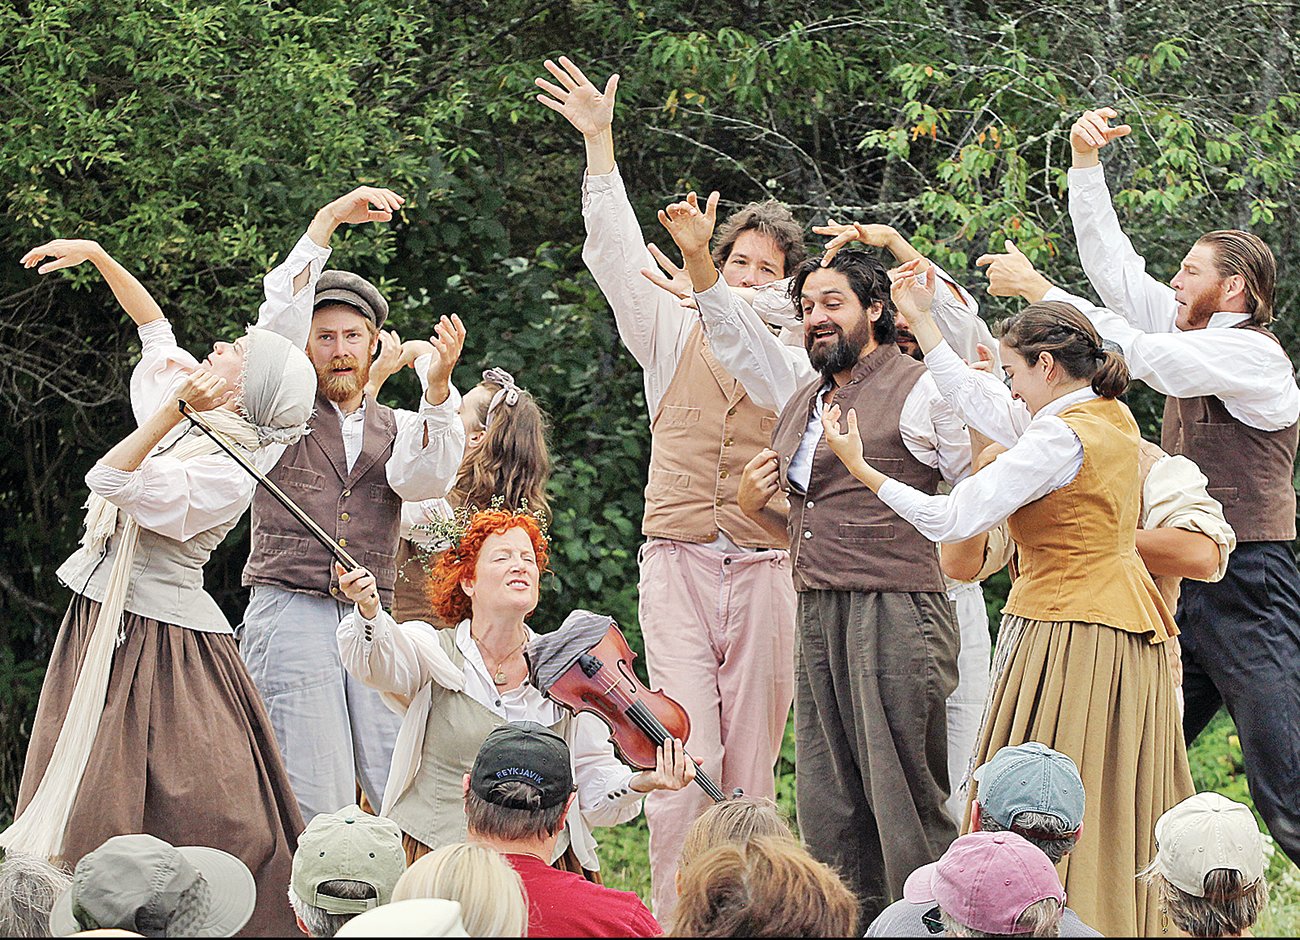 The Ely “Nature” 
performance featured professional actors and musicians from the Minneapolis area, some of whom are Guthrie performers.